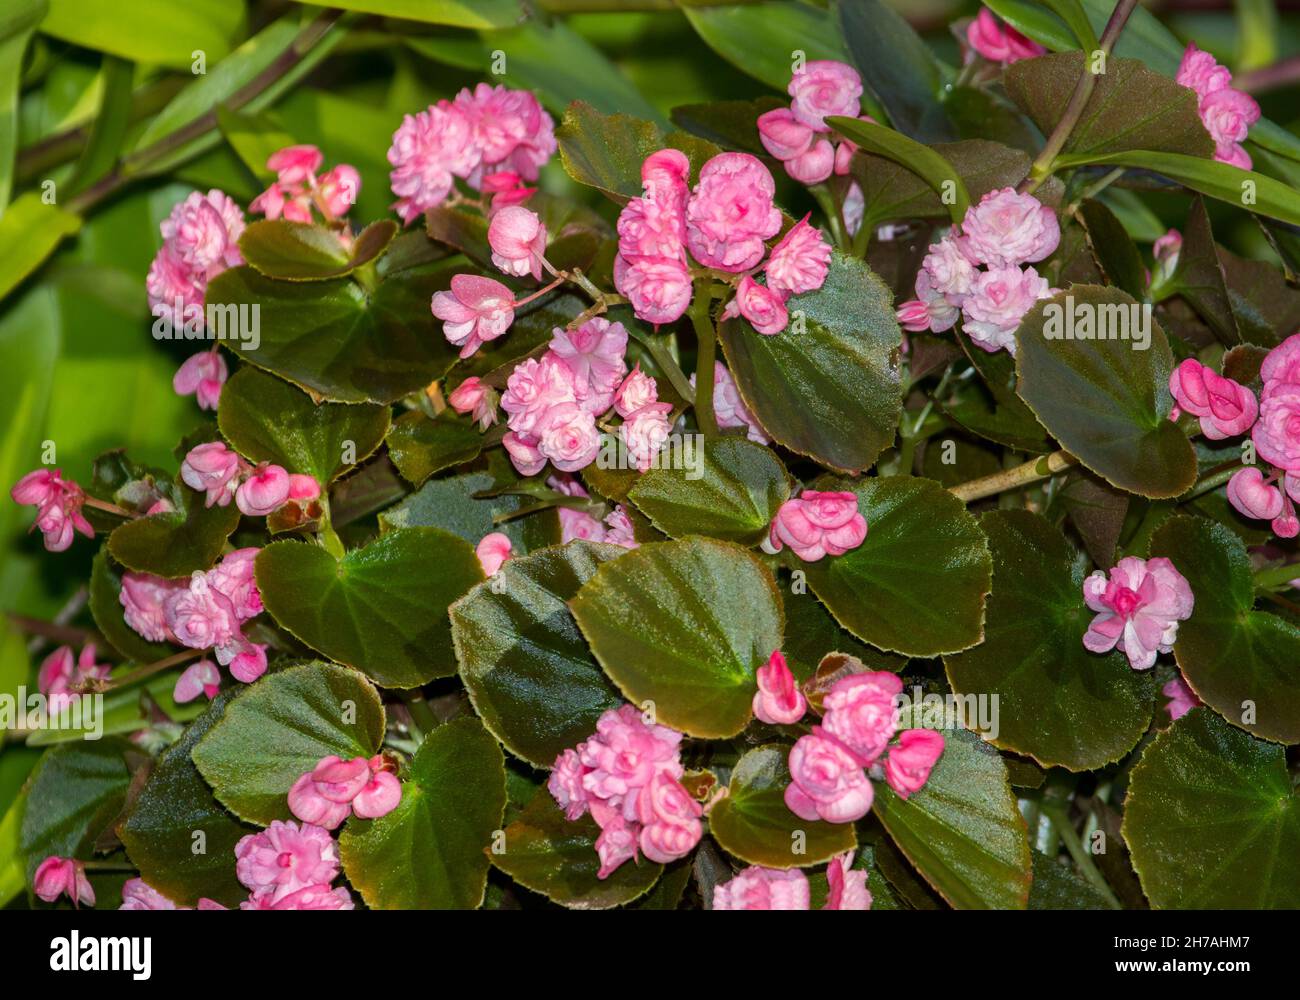 Double pink flowers and dark green leaves of Begonia semperflorens, bedding begonia in an Australian garden Stock Photo